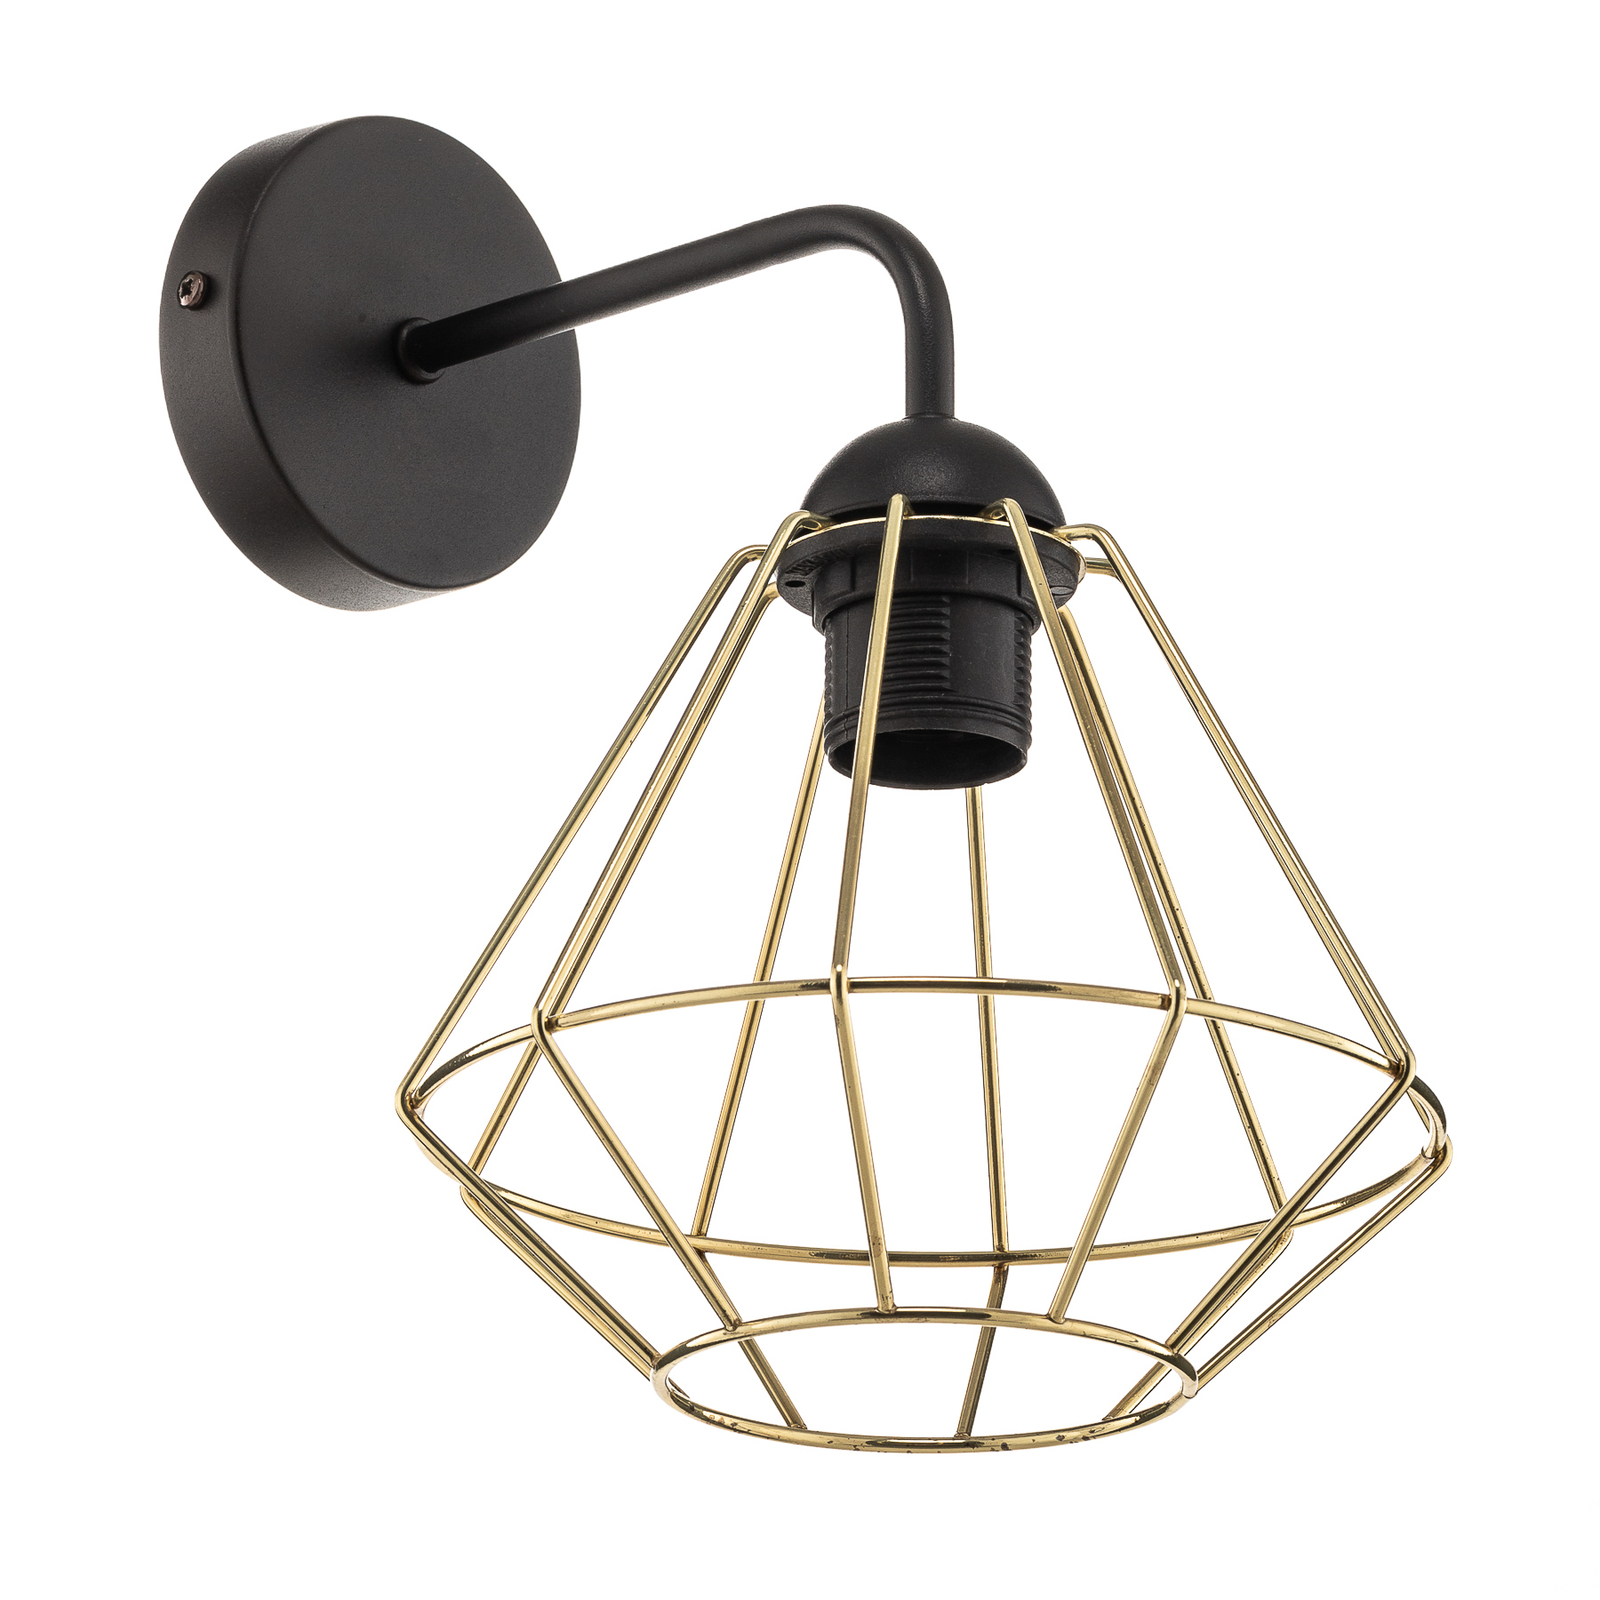 Lupo wall light, golden cage lampshade